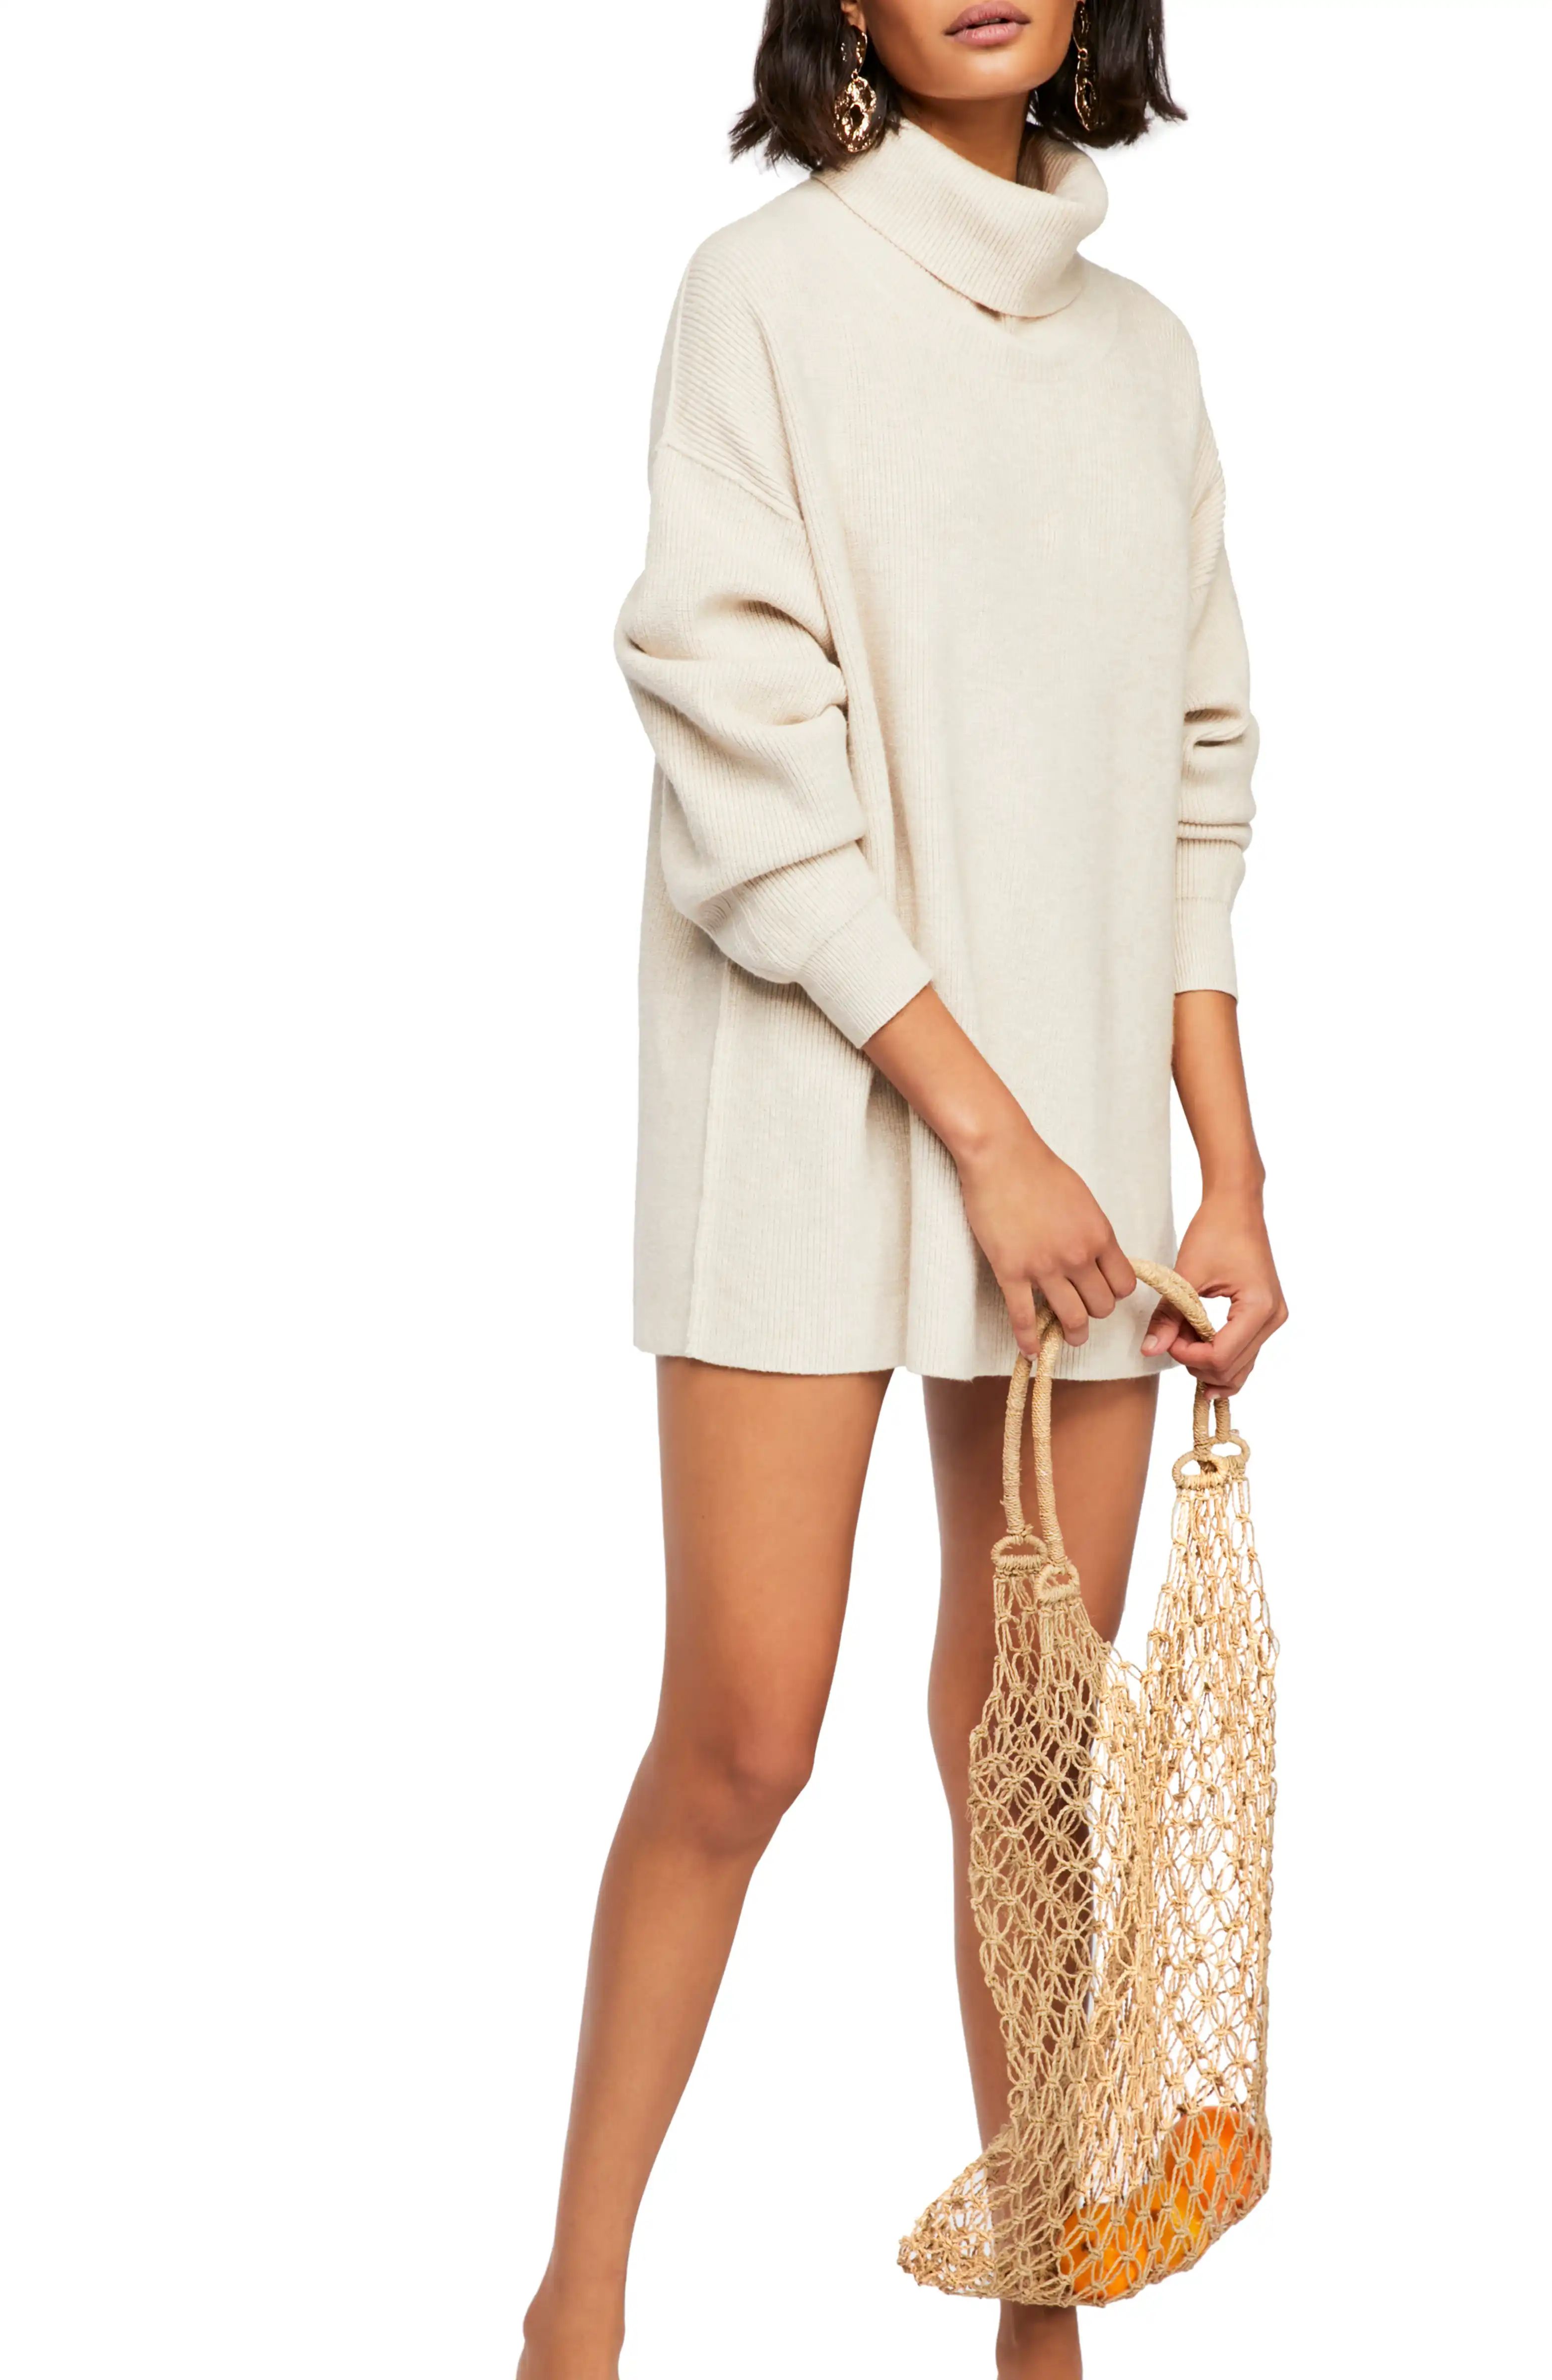 Softly Structured Knit Tunic | Nordstrom